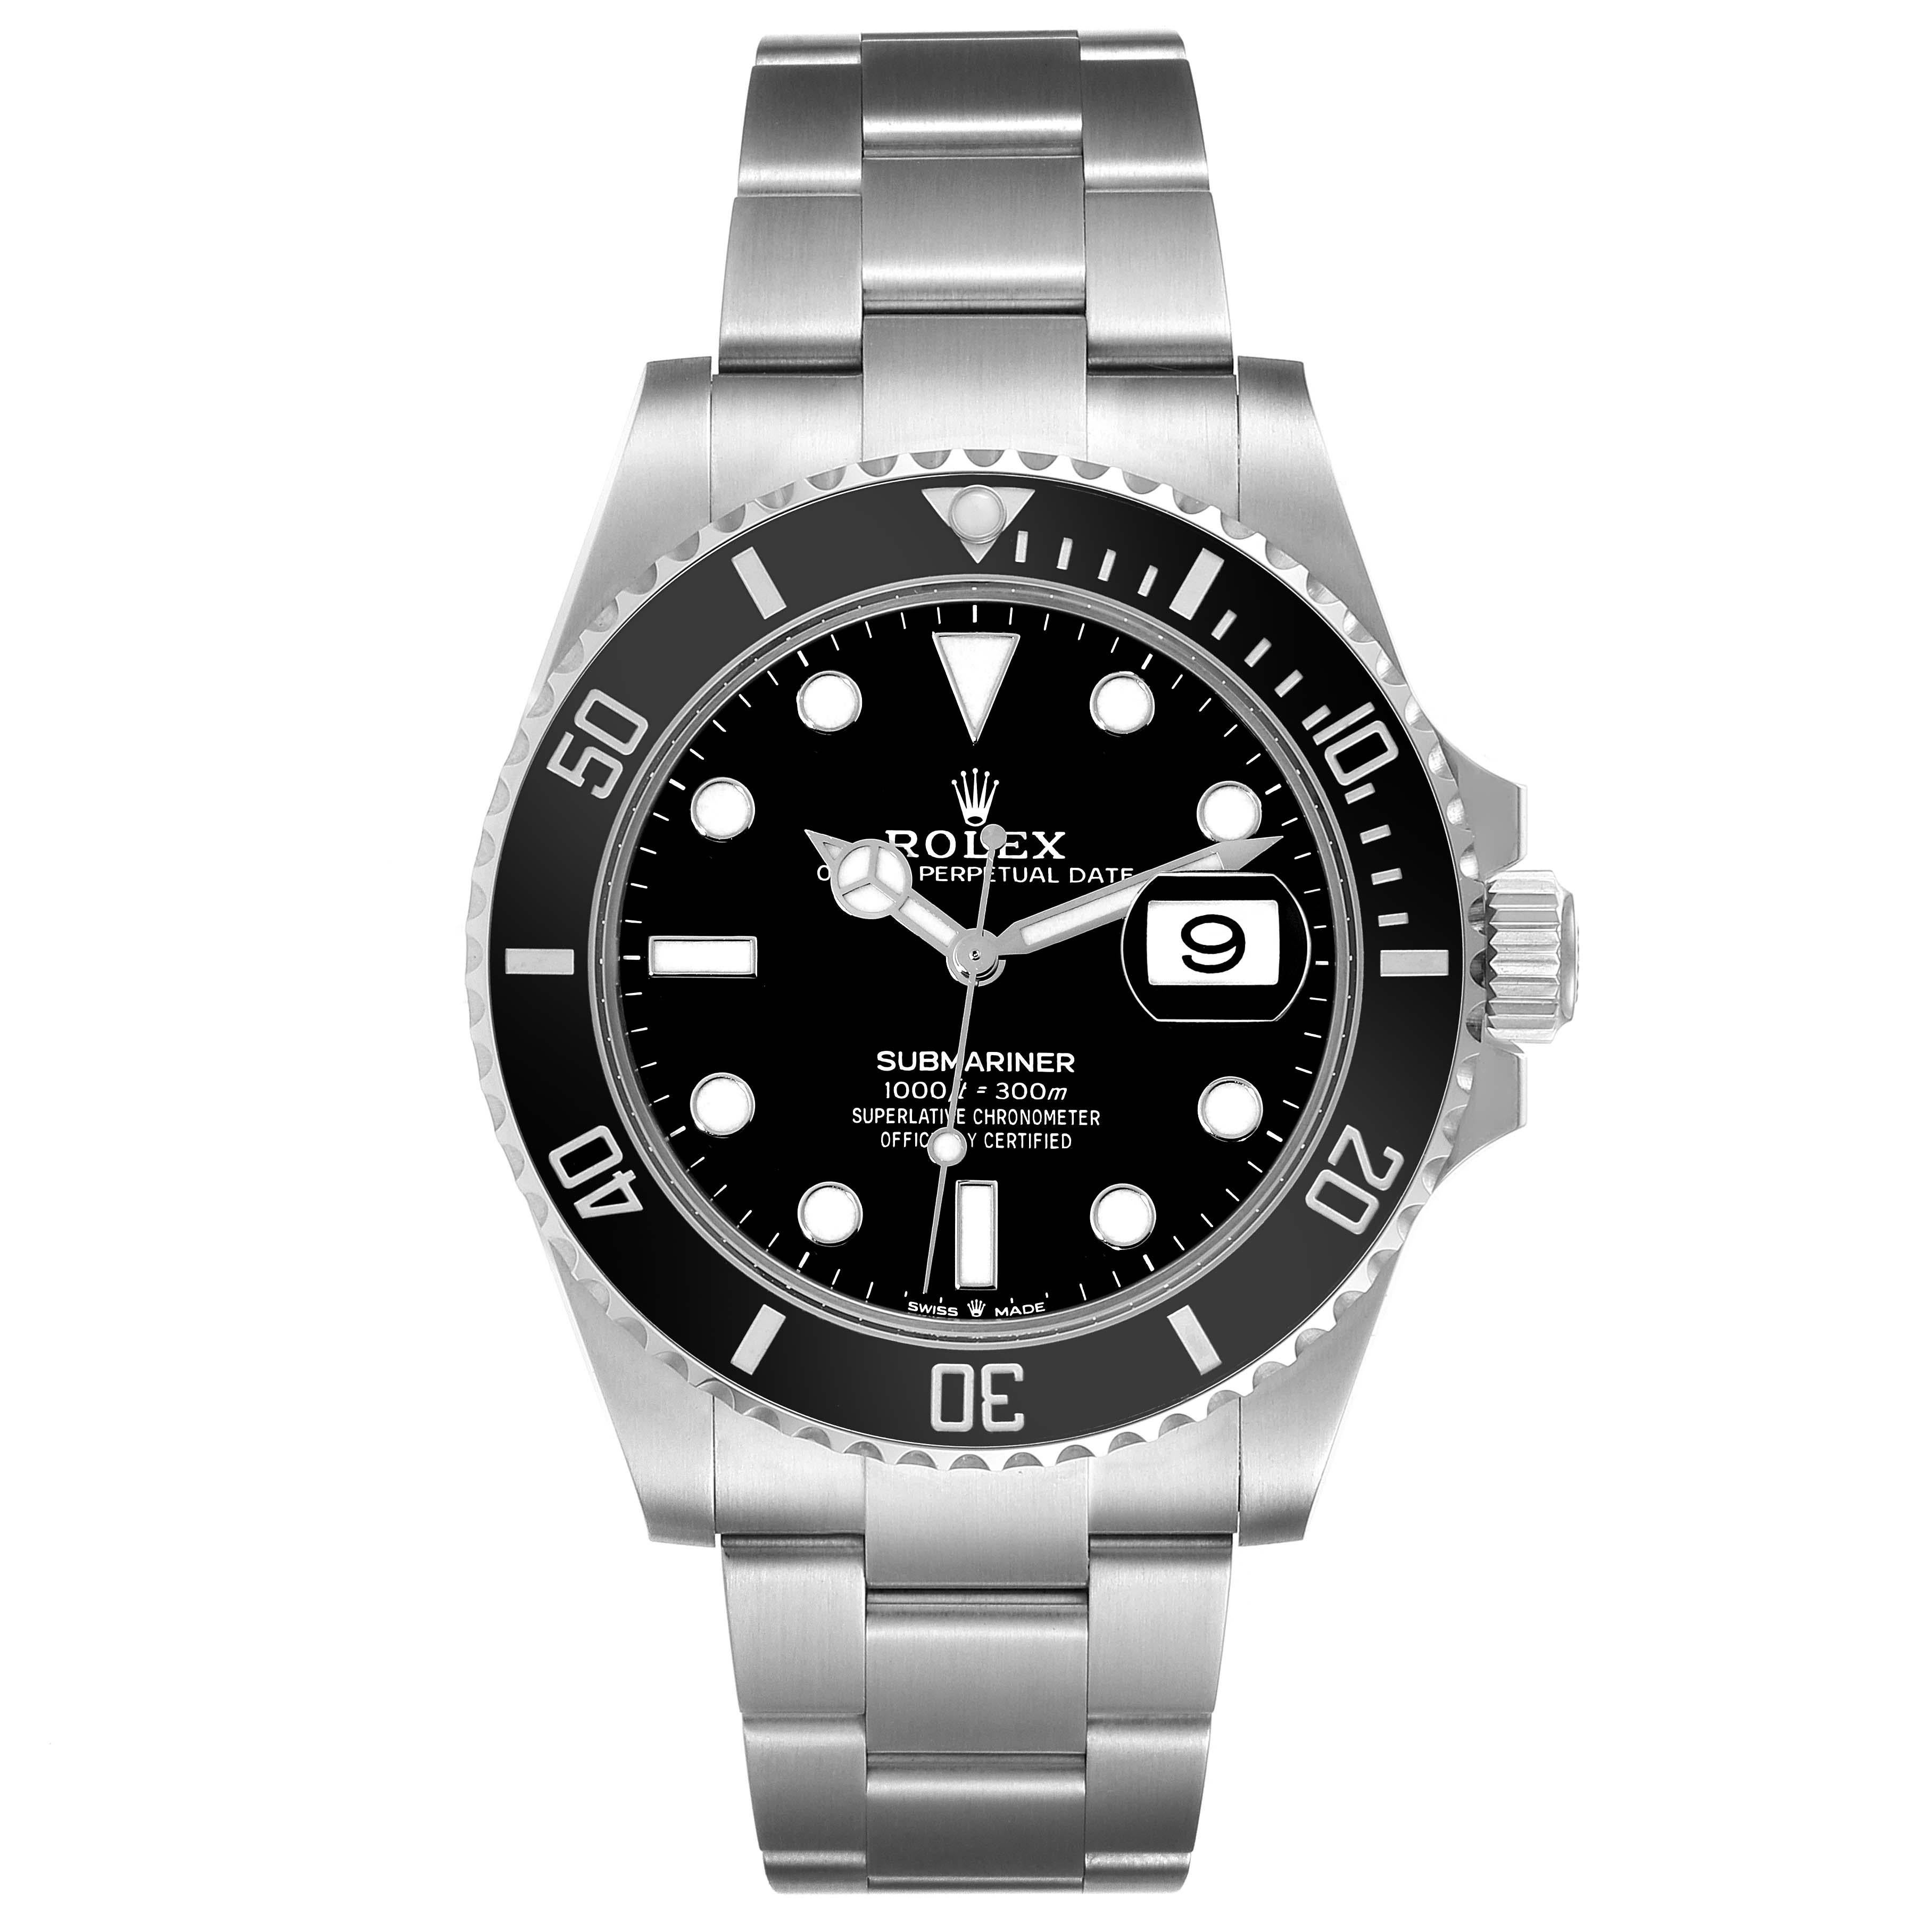 Rolex Submariner Black Dial Ceramic Bezel Steel Mens Watch 126610 Box Card. Officially certified chronometer automatic self-winding movement. Stainless steel case 41 mm in diameter. Rolex logo on the crown. Unidirectional rotating black ceramic